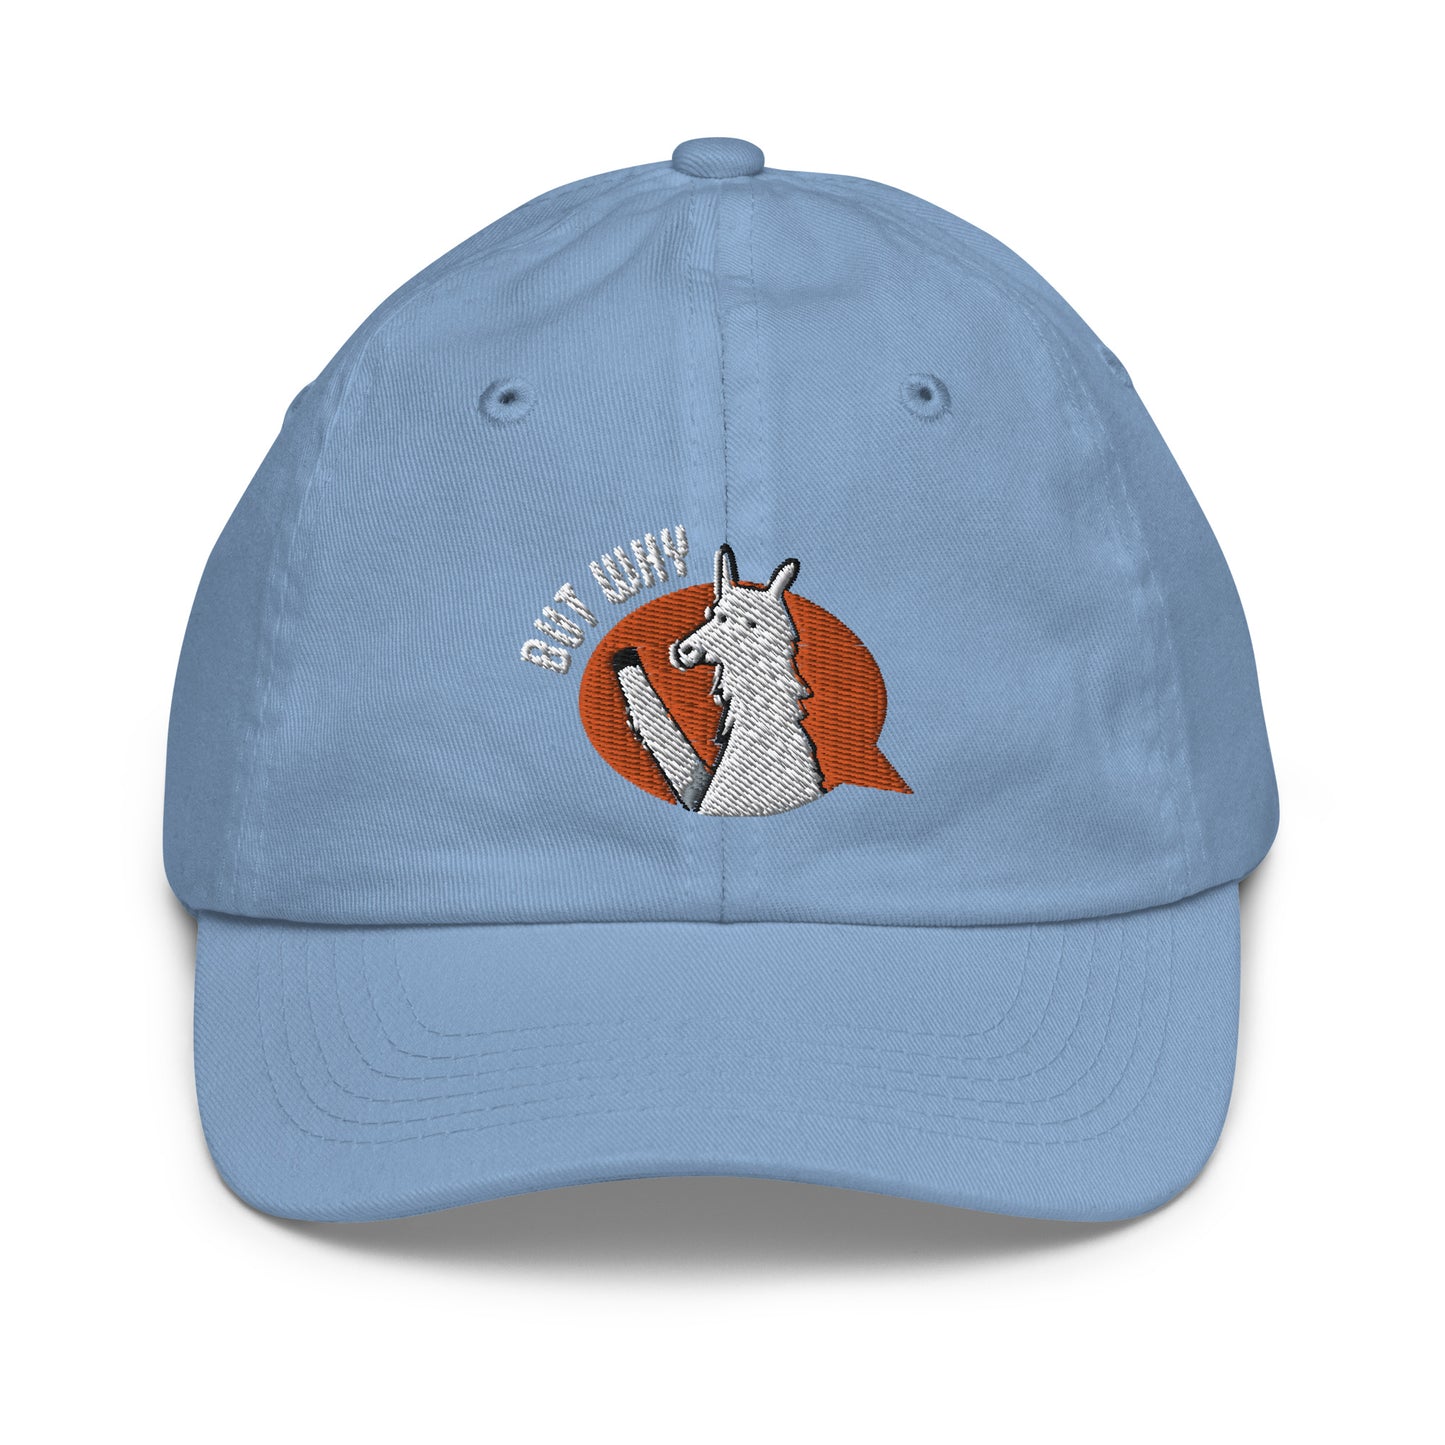 Youth Ball Cap - Embroidered Llama (multiple colors)